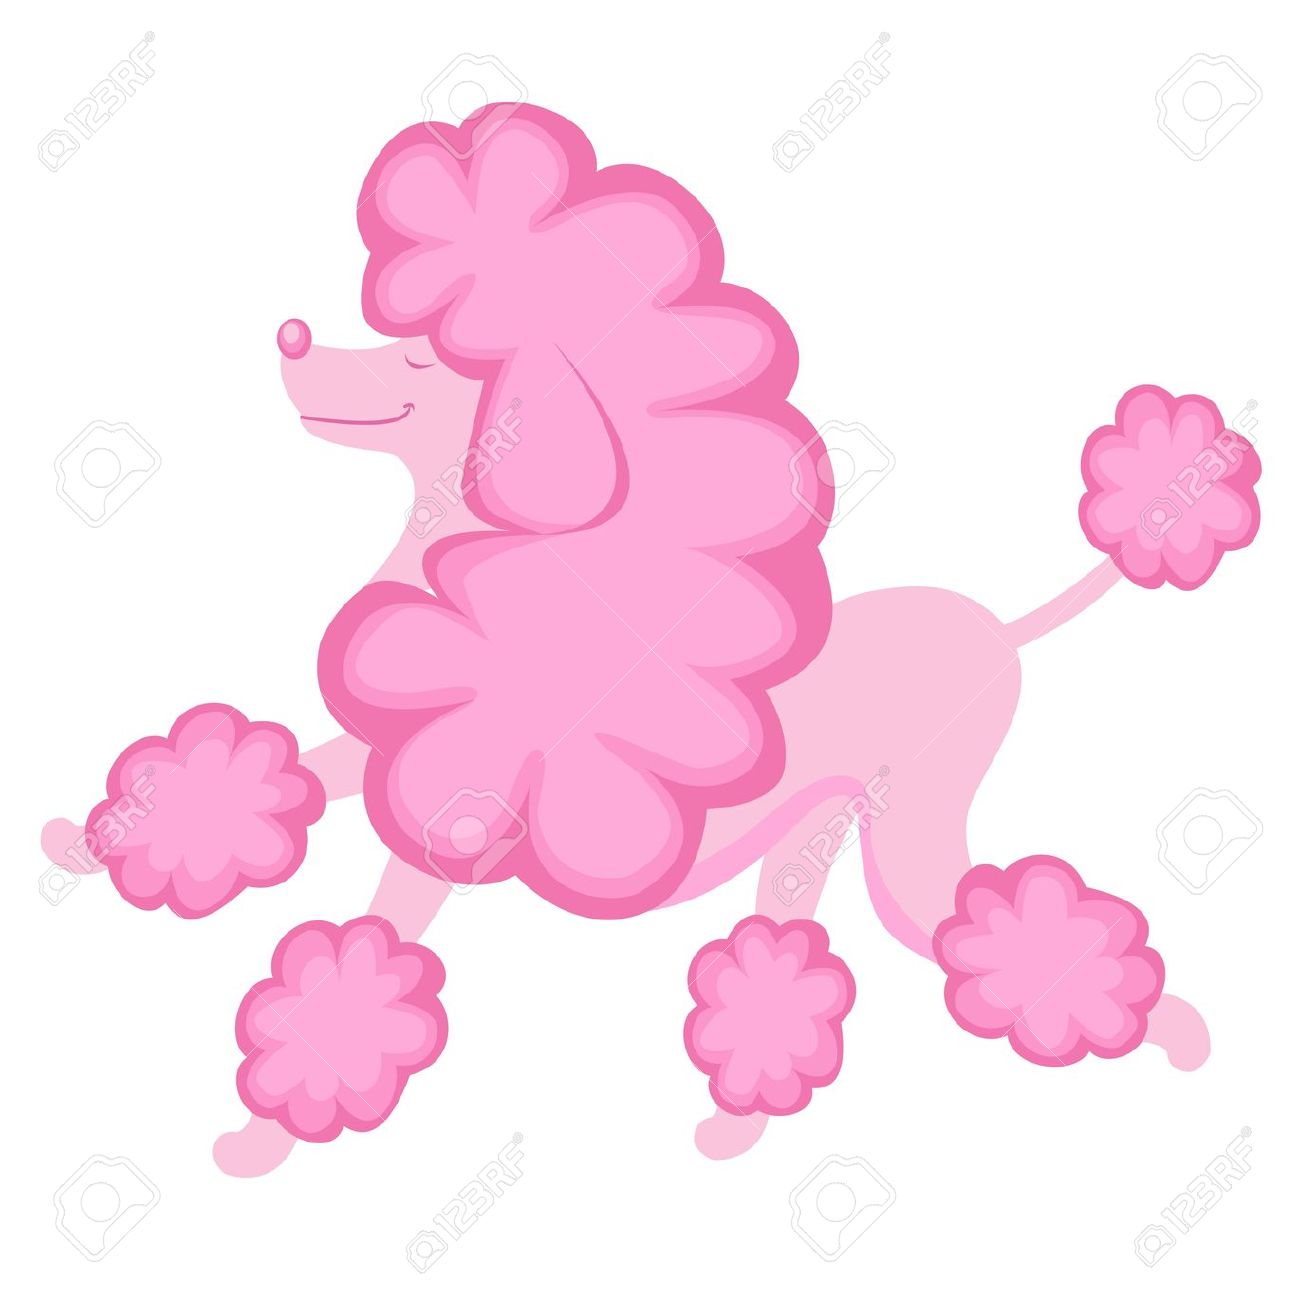 Poodle clipart #8, Download drawings